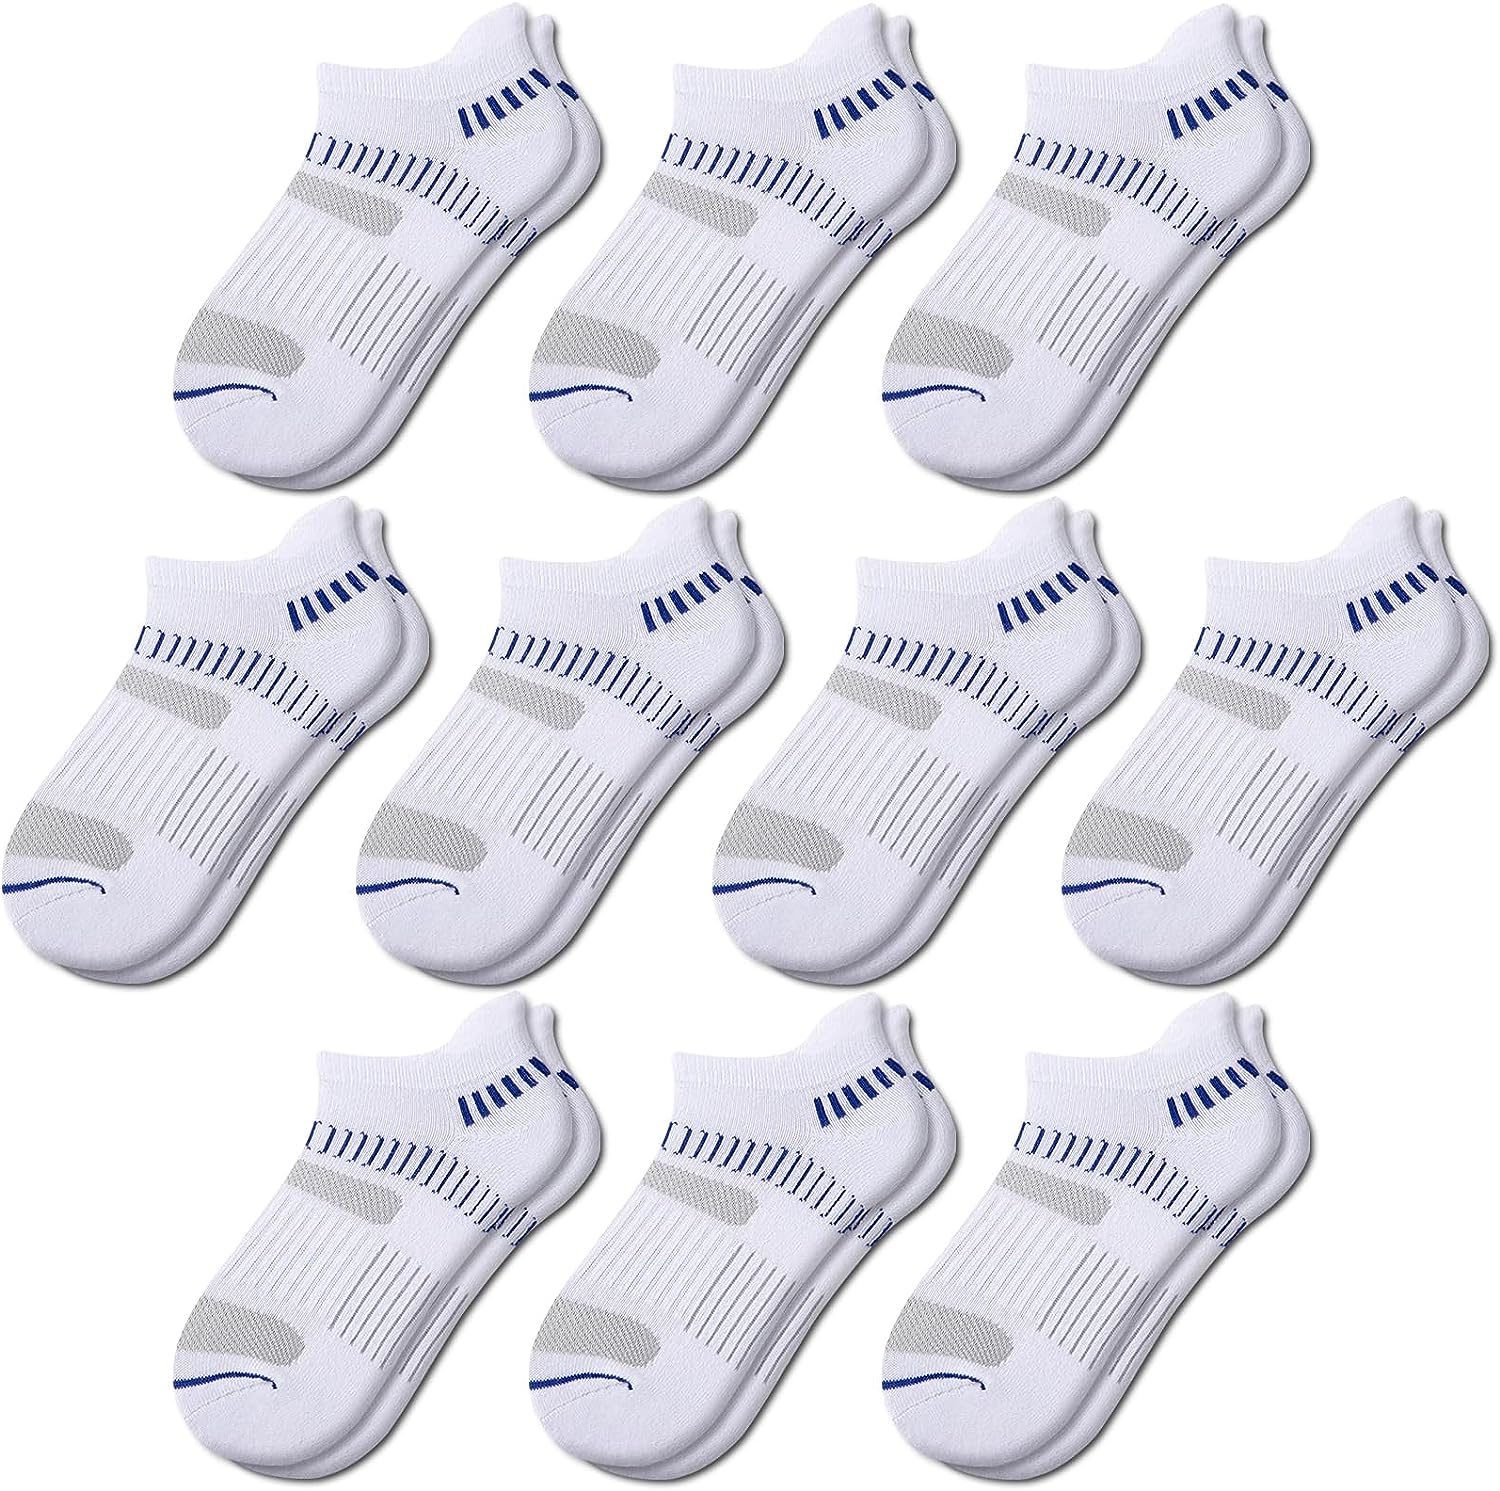 Comfoex 10 Pairs Boys Socks Ankle Athletic Socks For Big Little Kids Cotton  Half Cushioned Socks Grey 10 Pairs 7-10 Years